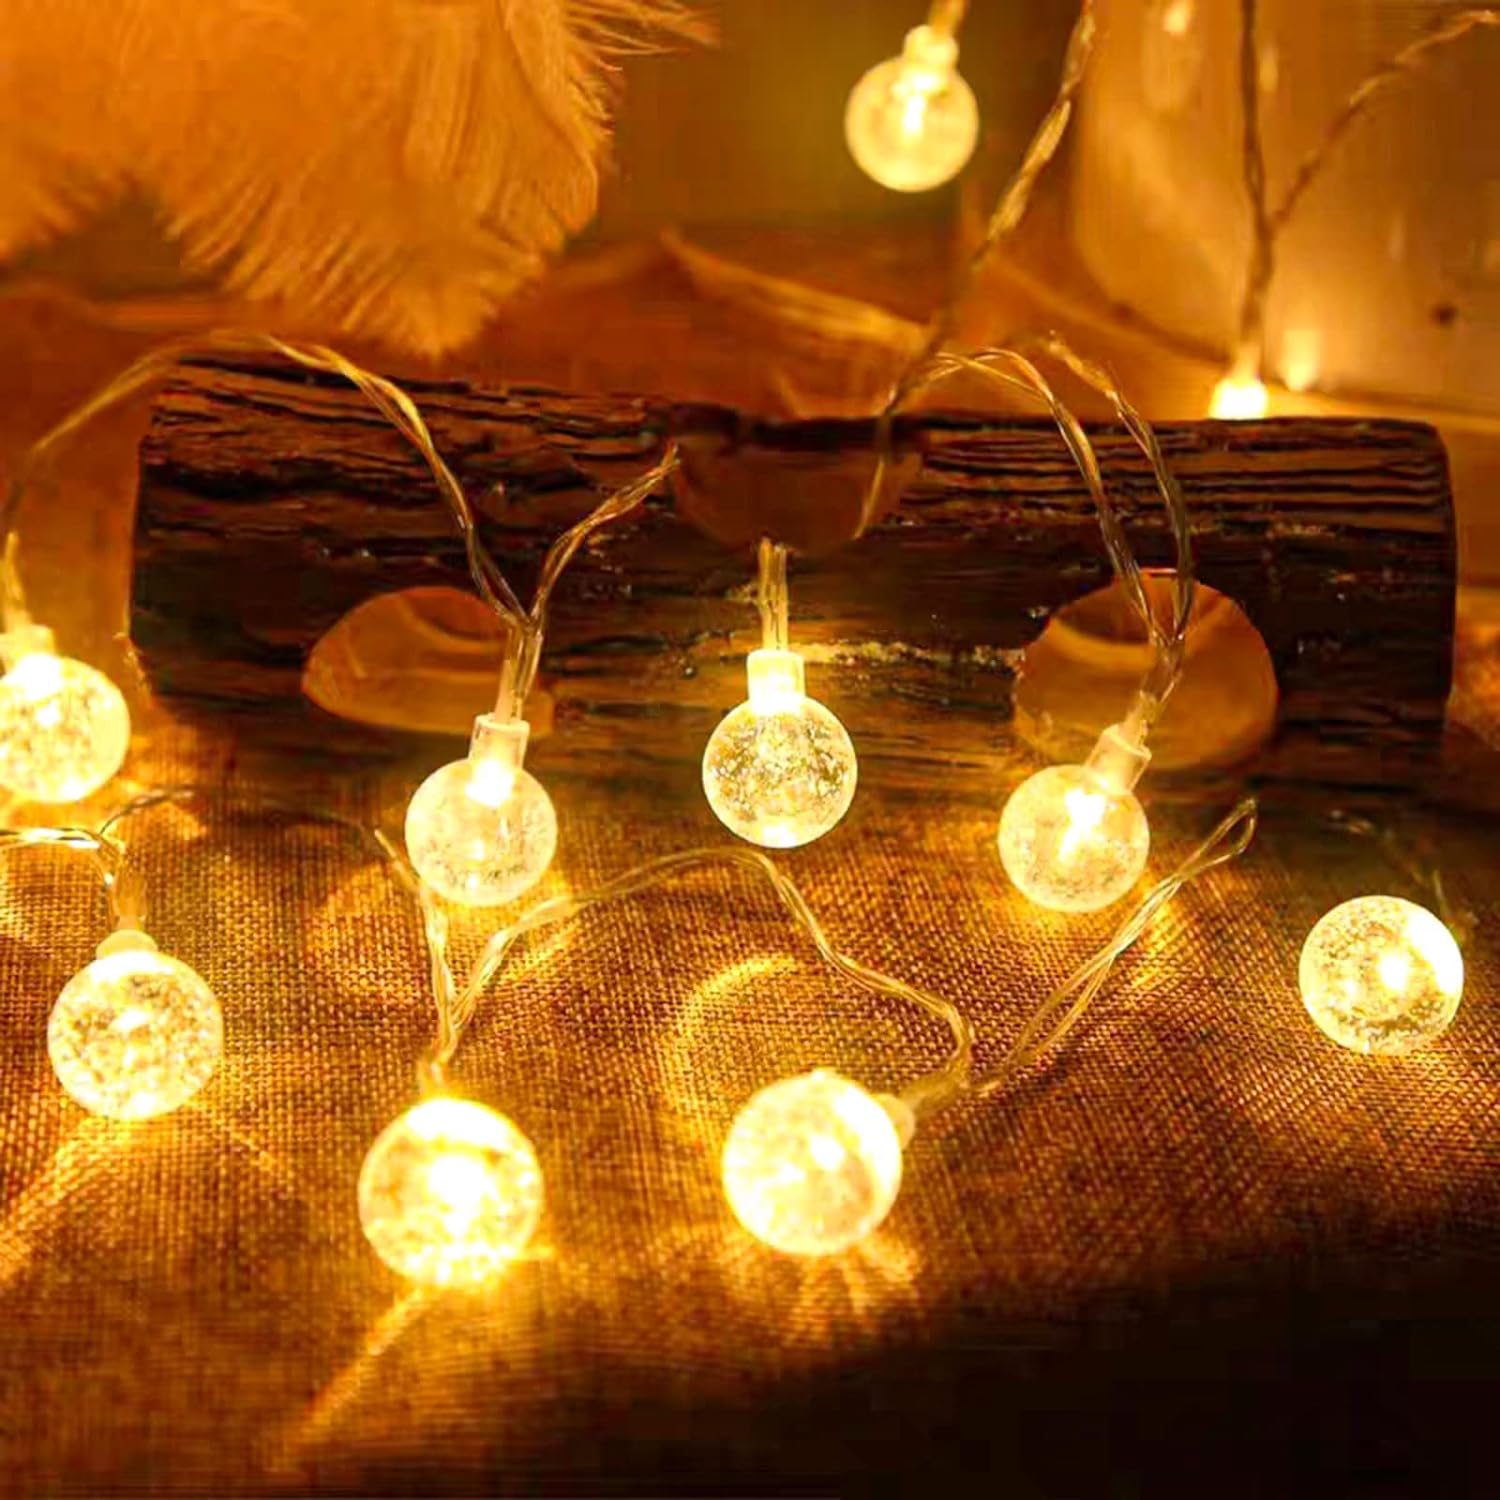 

Crystal Globe String Lights Battery Operated - 39ft 120 Led Globe Fairy Lights With Remote And 8 Modes, For Bedroom Tent Loft Camping Porch Patio Party Wedding Decor, Warm White